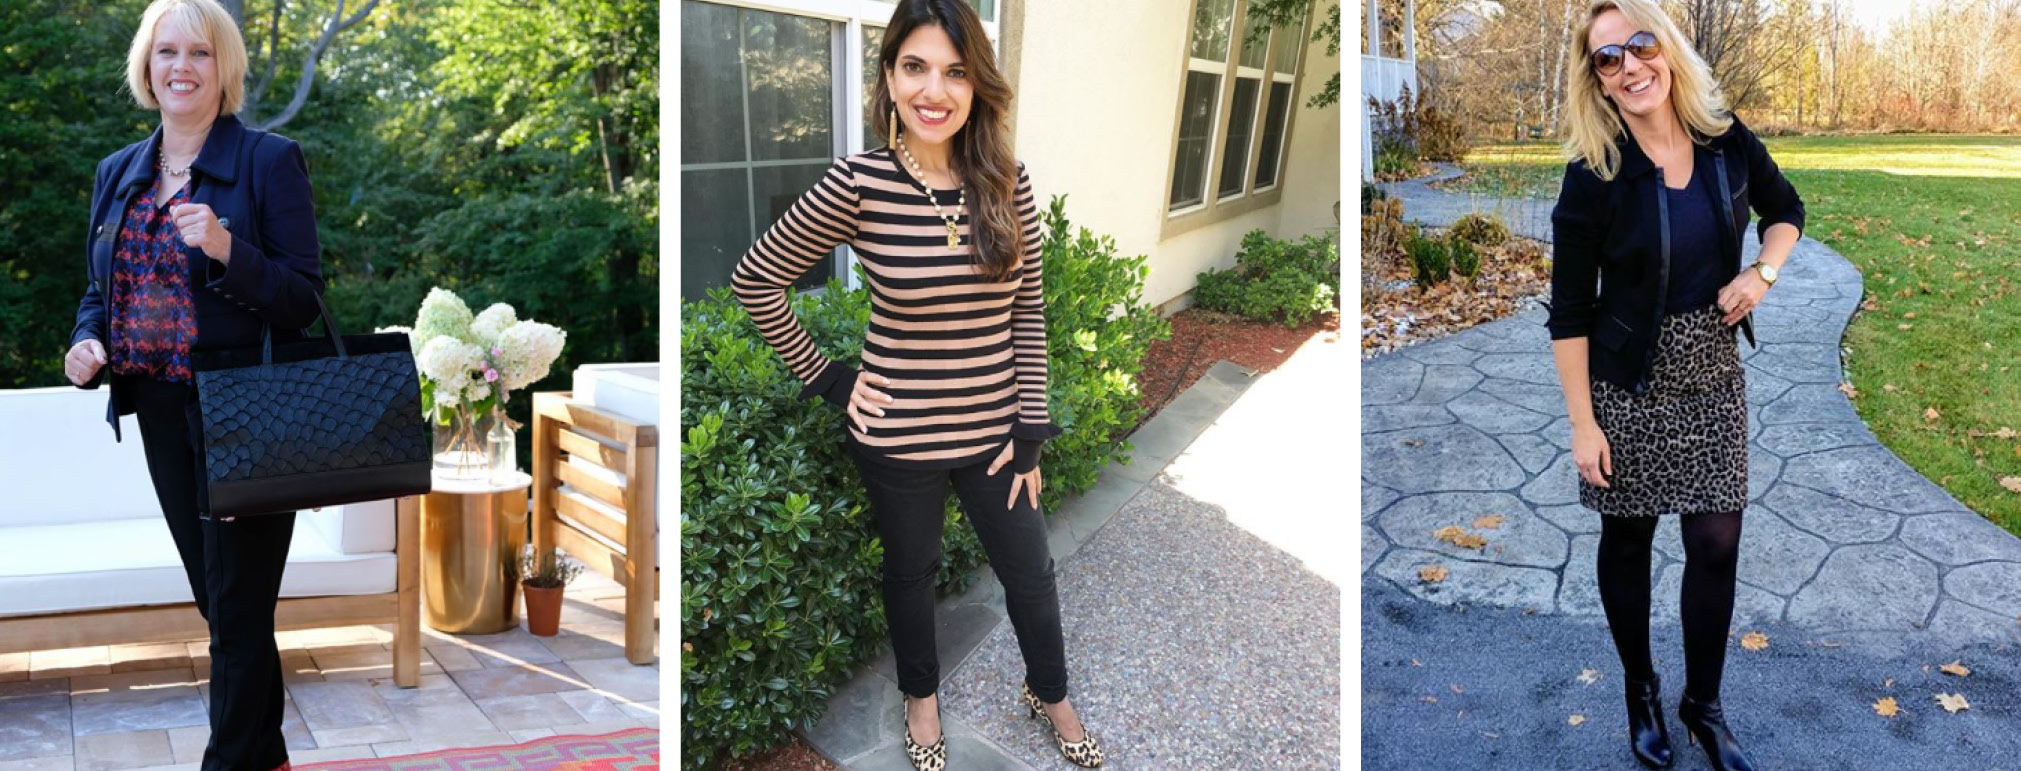 let’s get social with the best of #cabiclothing fall ‘17 - Cabi Spring ...